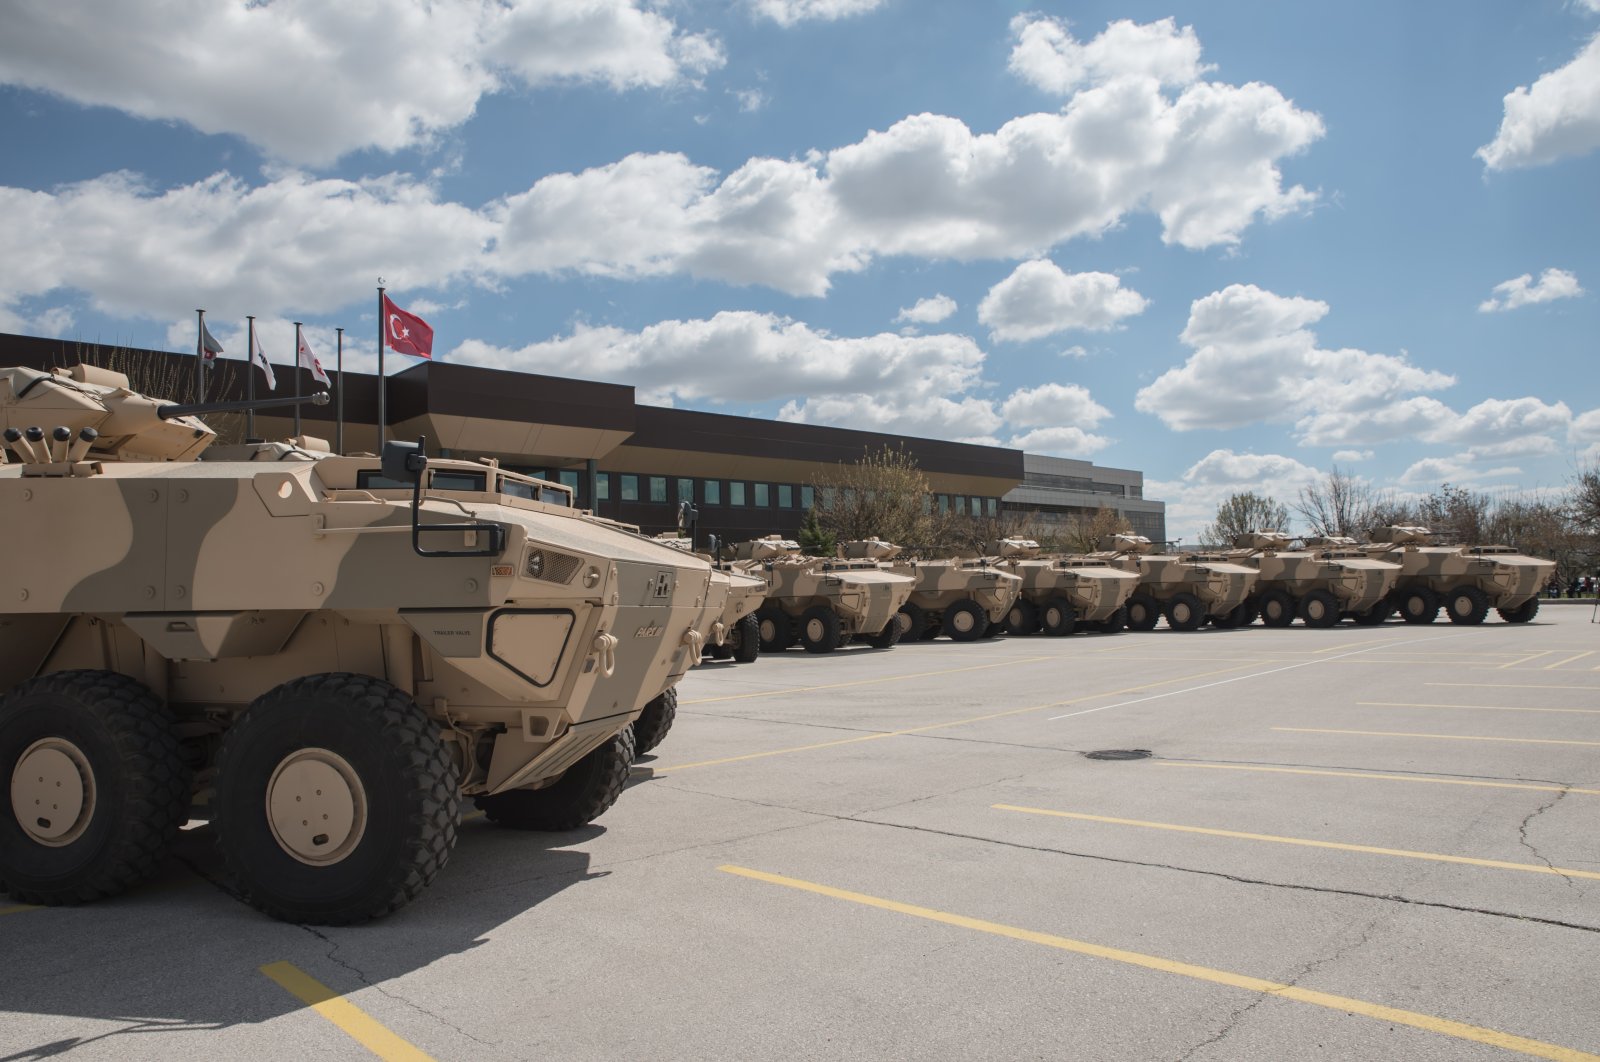 The FNSS has delivered total of 172 armored vehicles to Oman to date. (Photo by FNSS via AA)